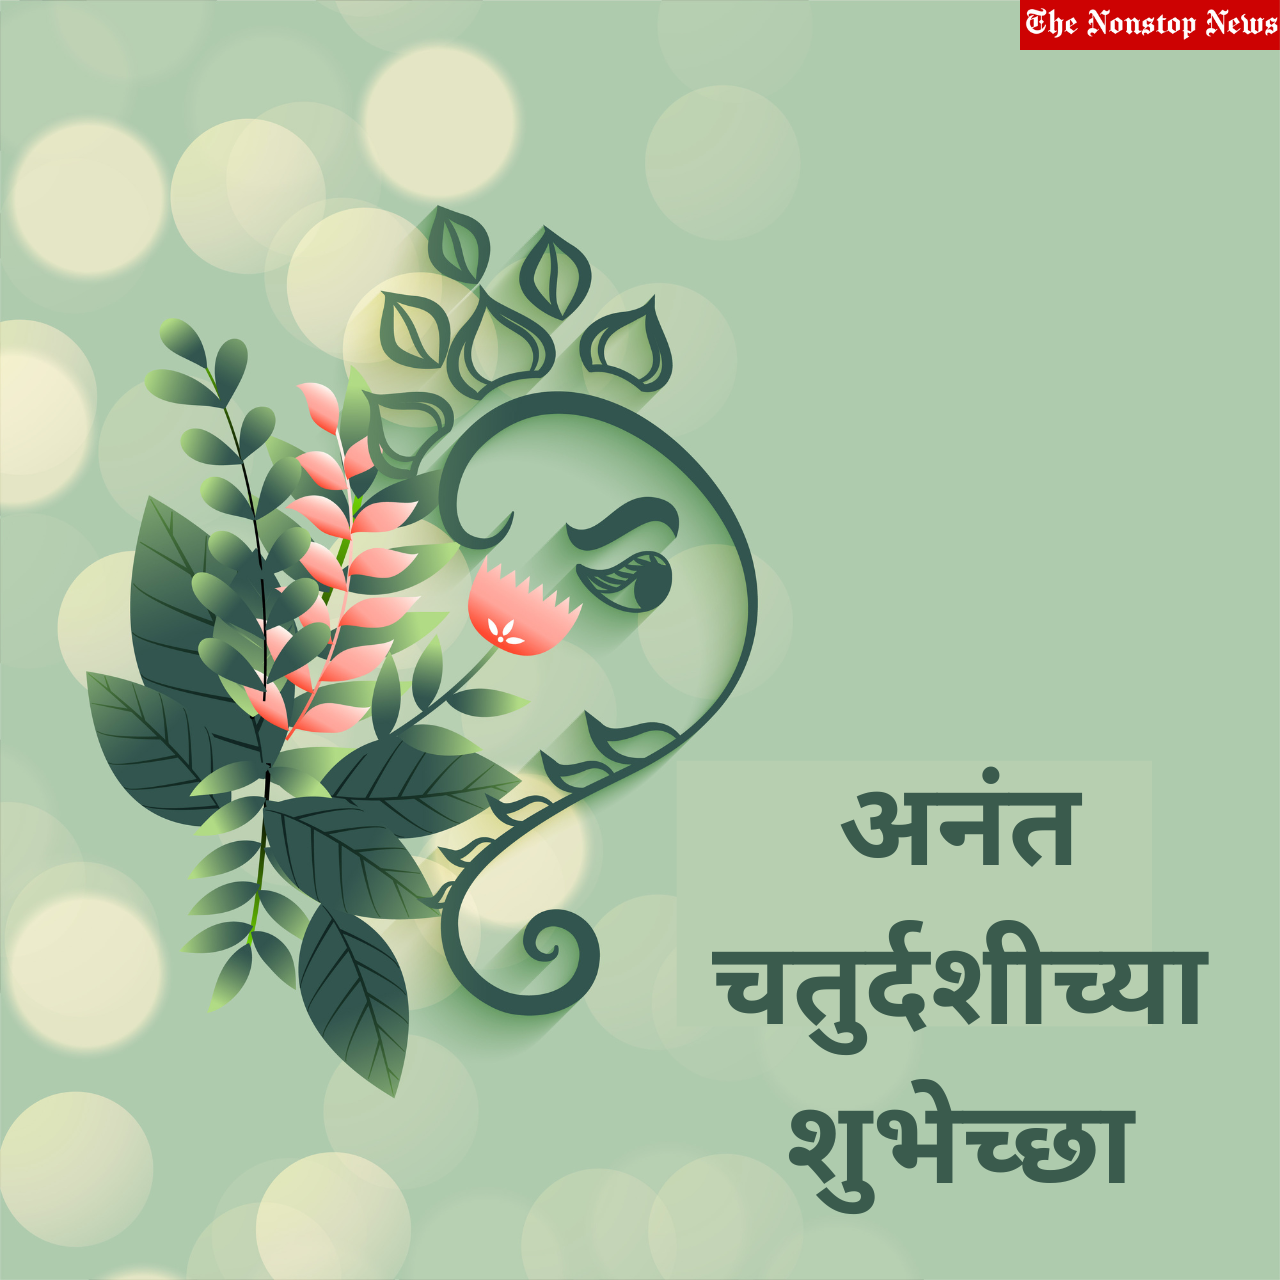 Happy Anant Chaturdashi 2022: Marathi Messages, Greetings, Quotes, Images, Wishes and Shayari to share